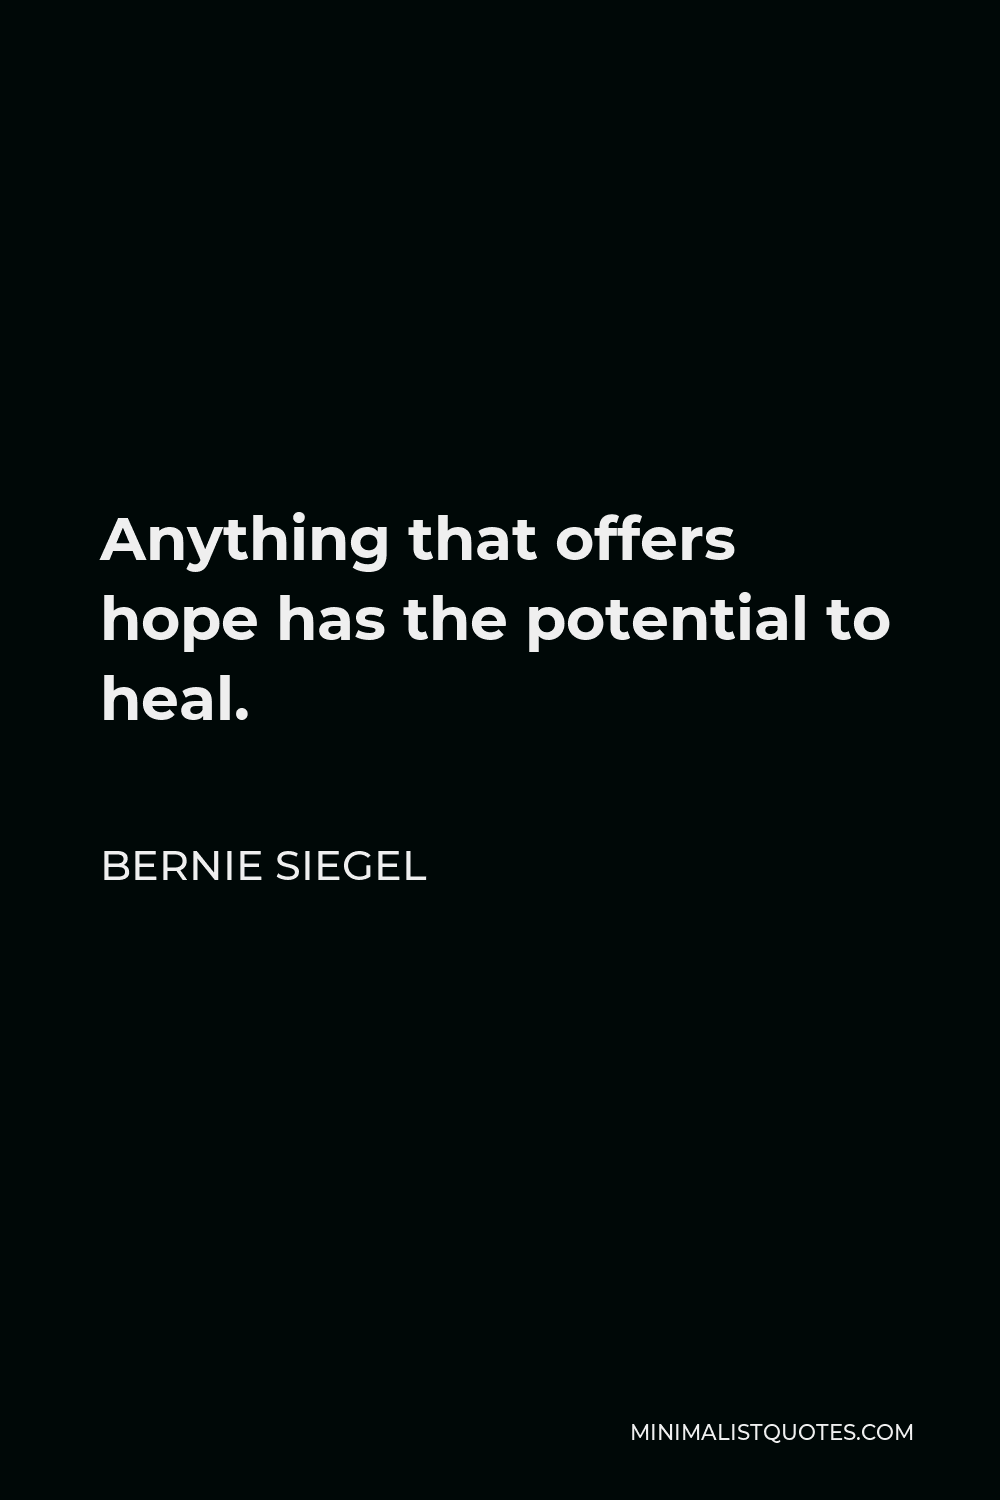 Bernie Siegel Quote - Anything that offers hope has the potential to heal.